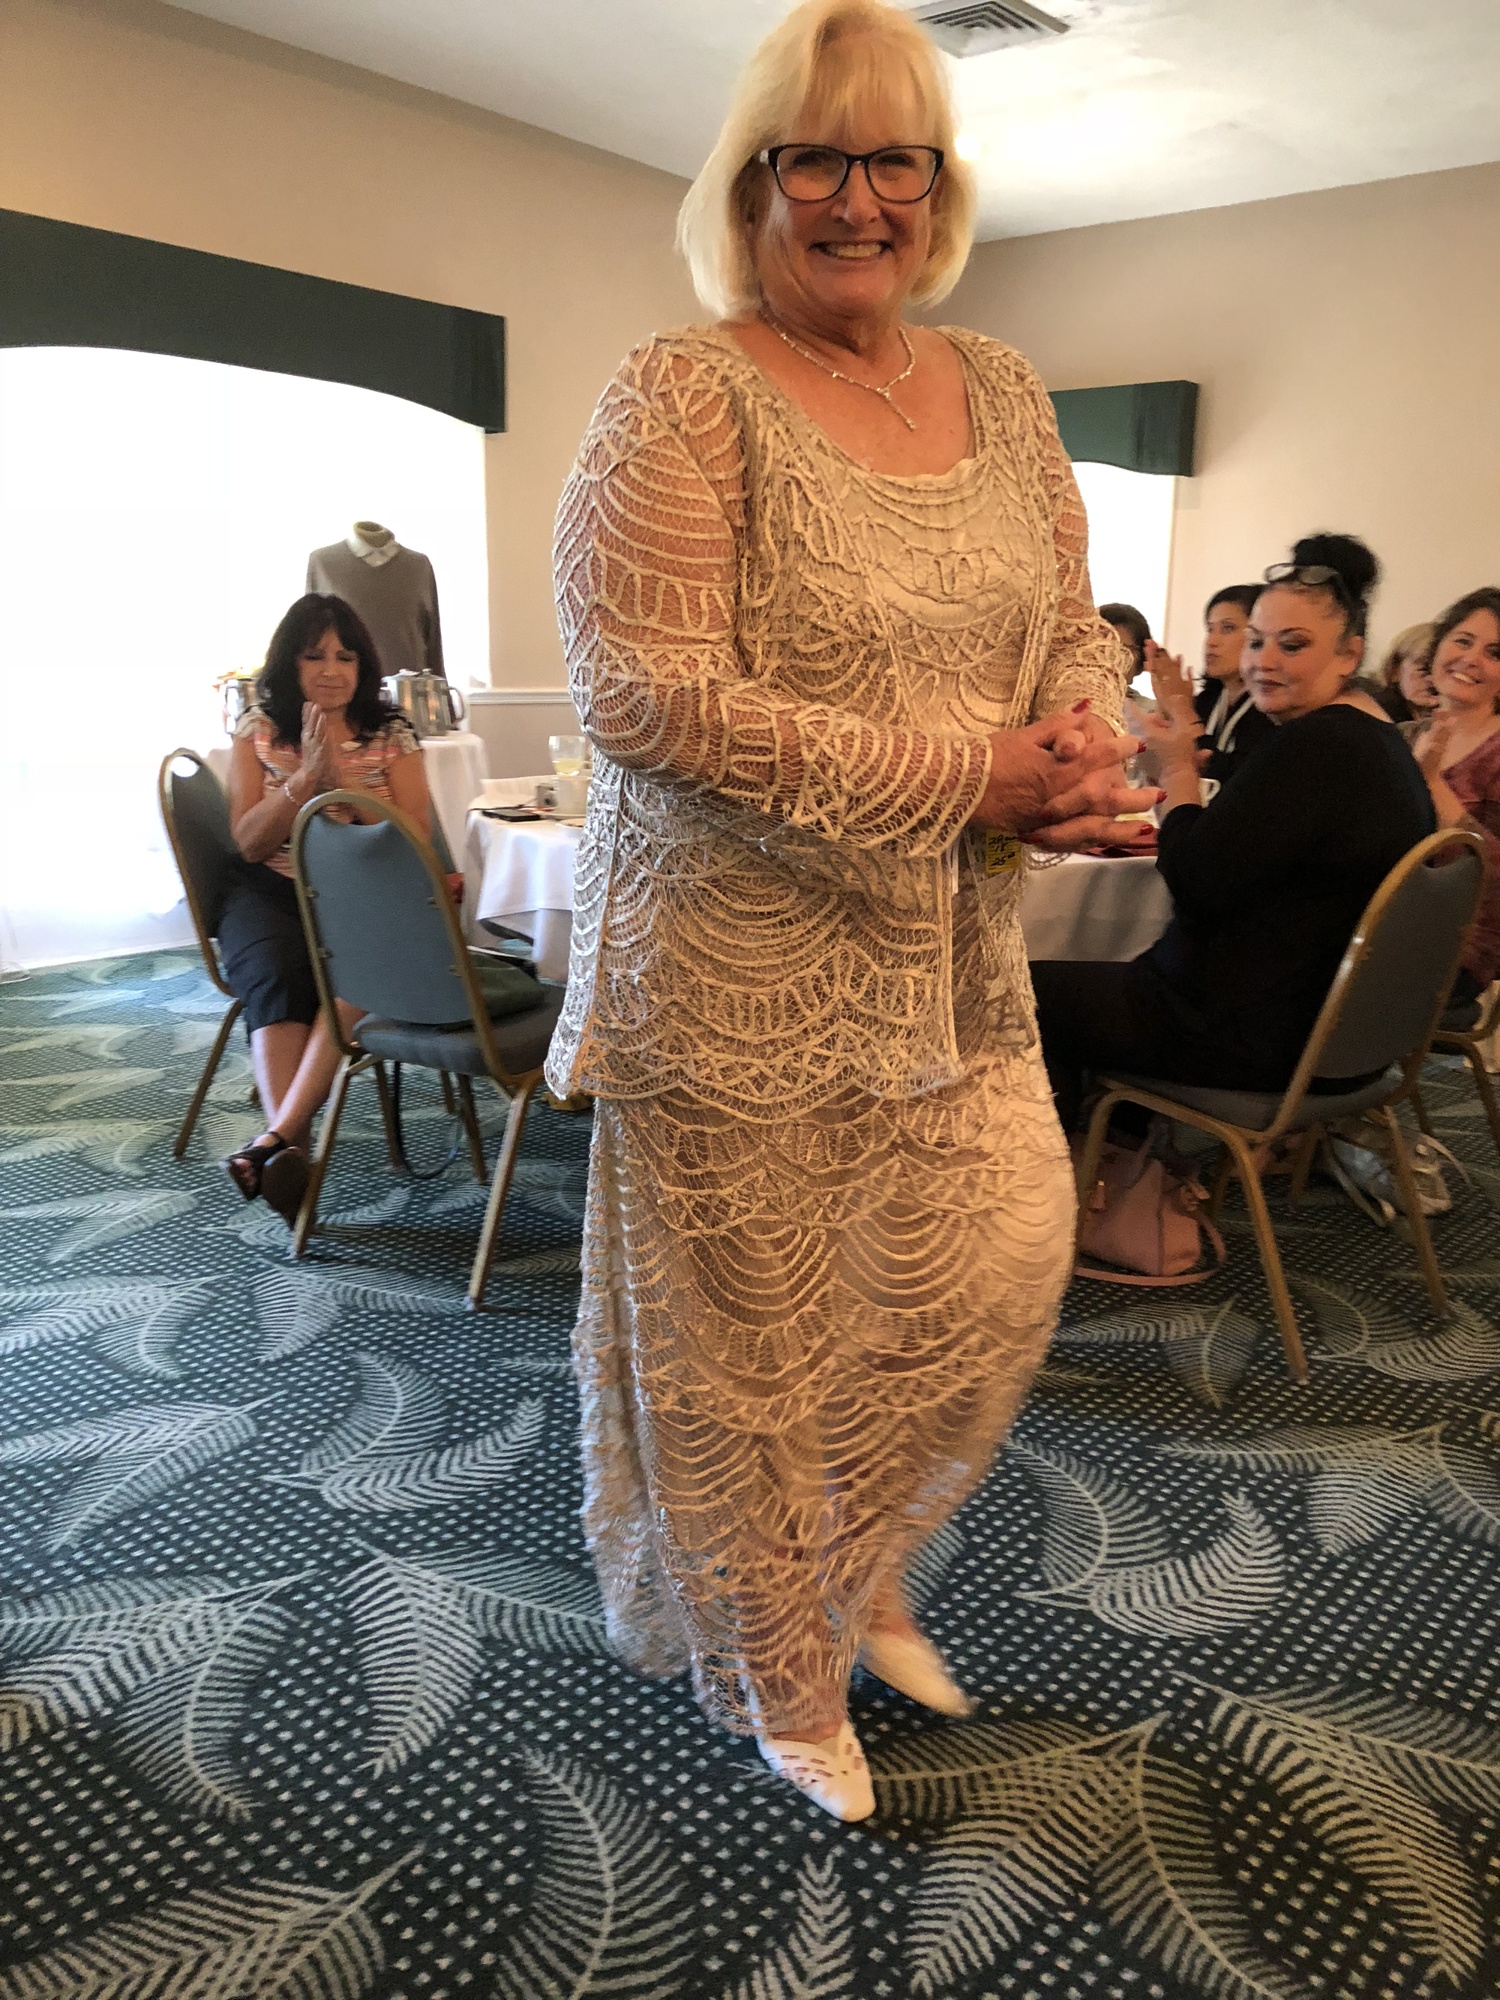 Nearly New Thrift store volunteer Jacque Mulvihill, who is also the wife of the Society of St Vincent de Paul's Vice President Patrick Mulvihill, at the fashion show and luncheon. Photo courtesy of  Evonne Ligeiro